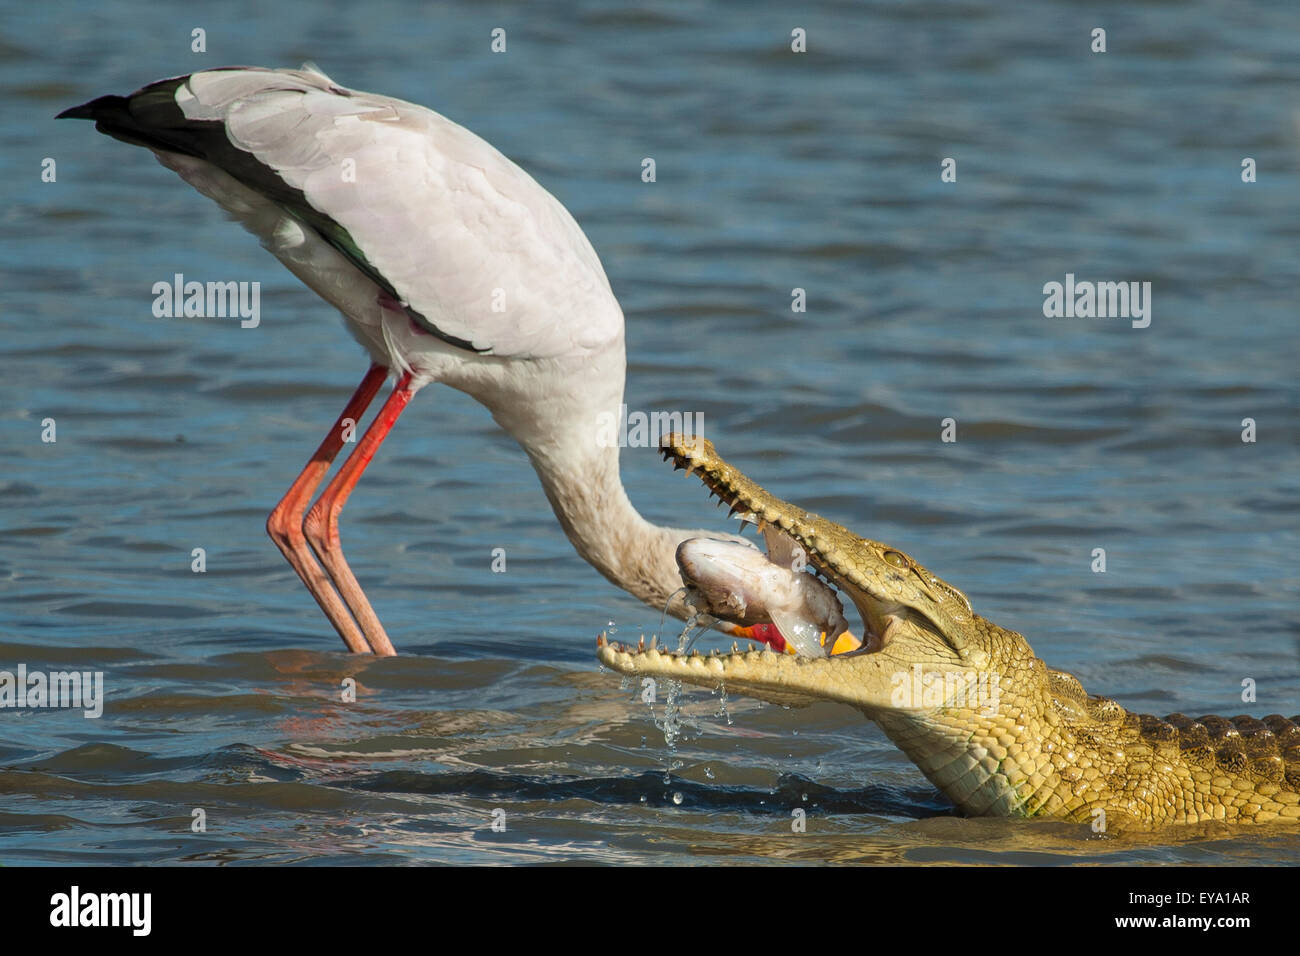 Crocodile appearing to eat a Yellow Billed Stork (but it's an optical illusion, the stork is behind the Crocodile. Stock Photo